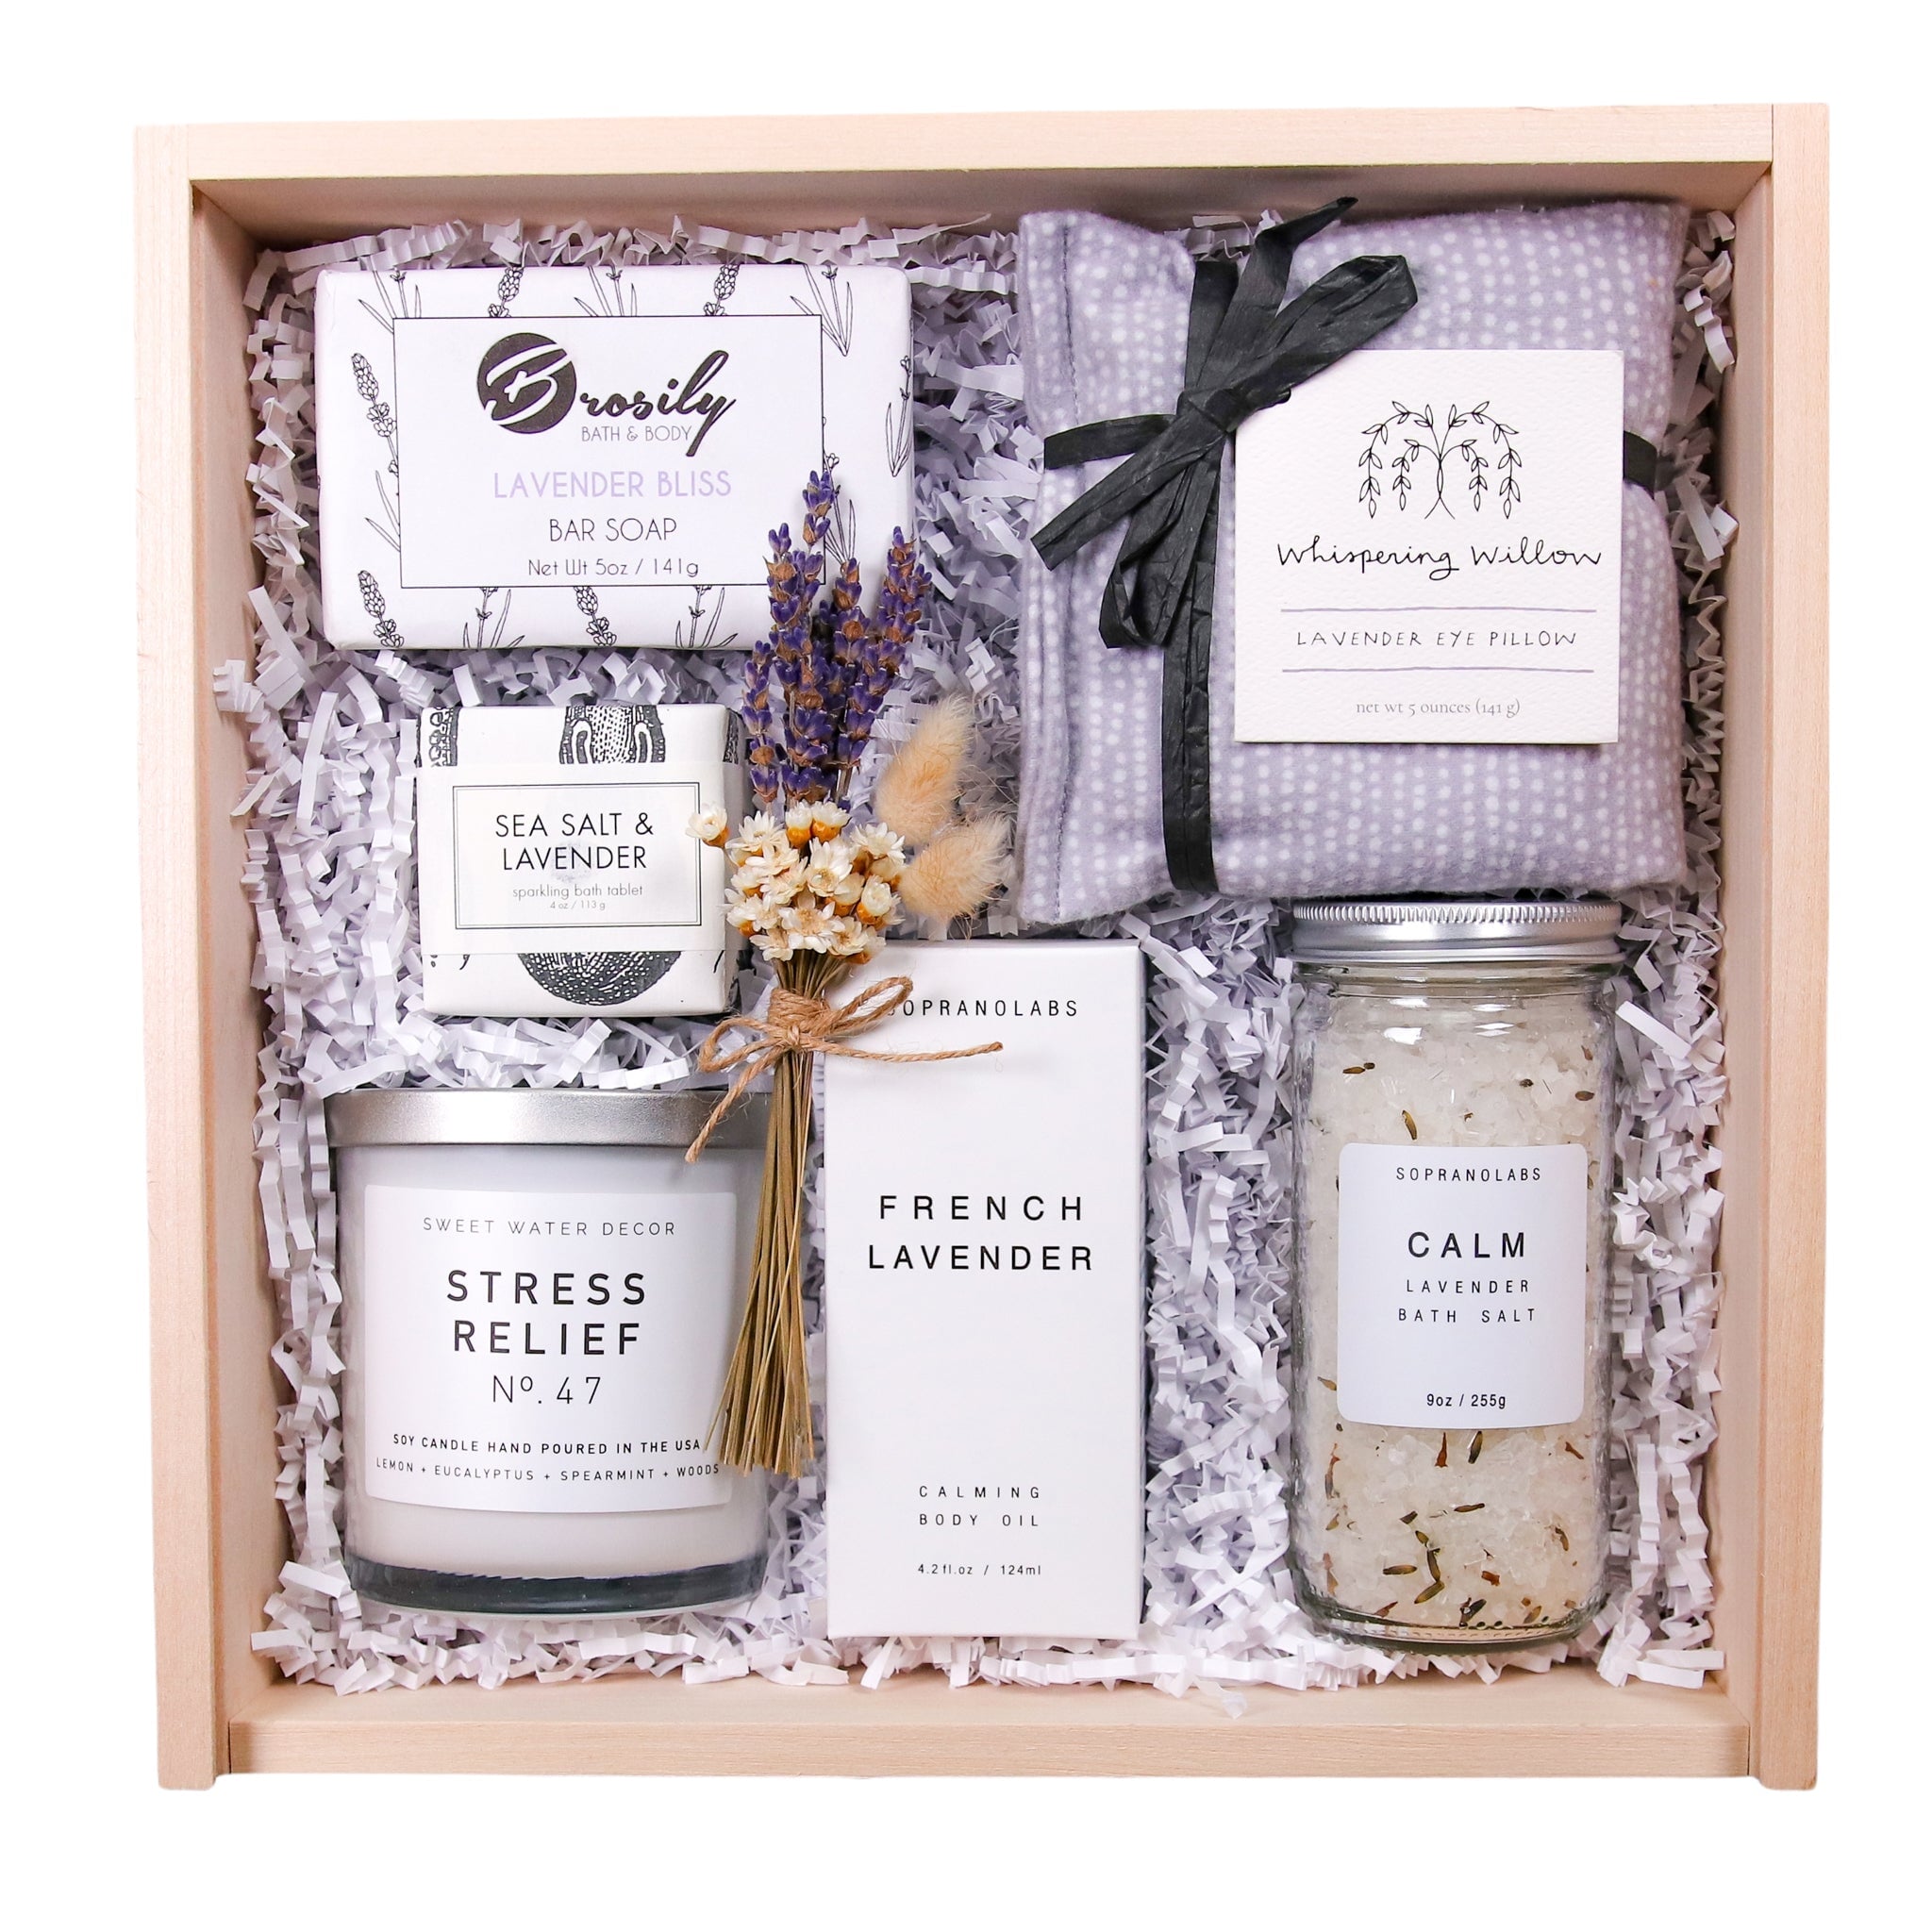 Lavender Spa Gift Box | Relax and Recharge Lavender bath salt, body oil, lavender soap, eye pillow, candle The Artisan Gift Boxes 